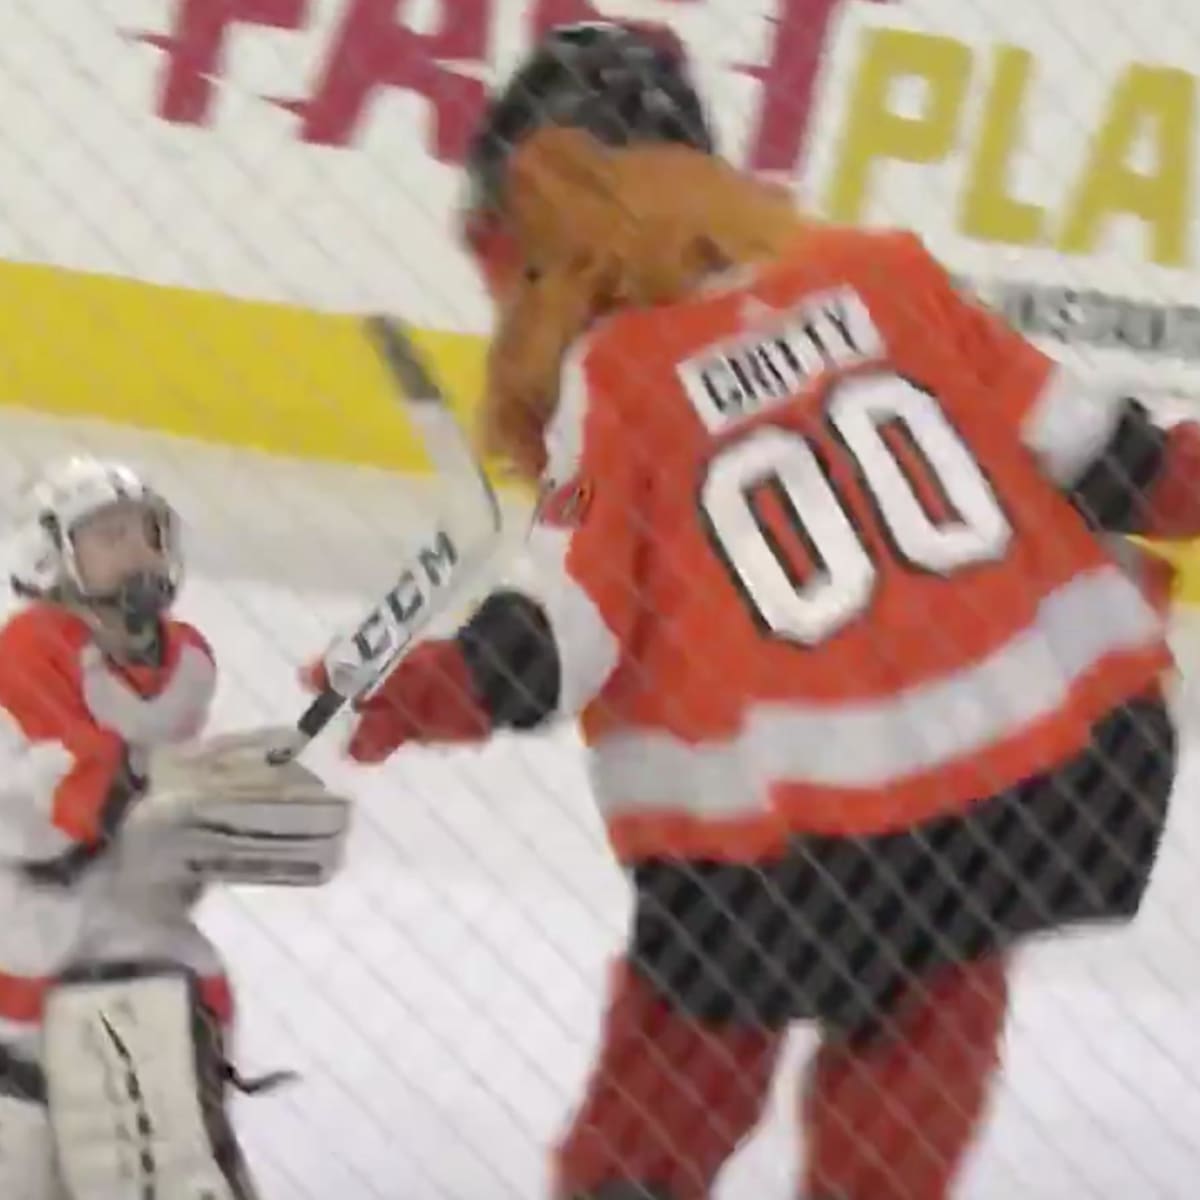 Internet defends 'Gritty' after Philly Flyers mascot is accused of punching  a kid — RT USA News